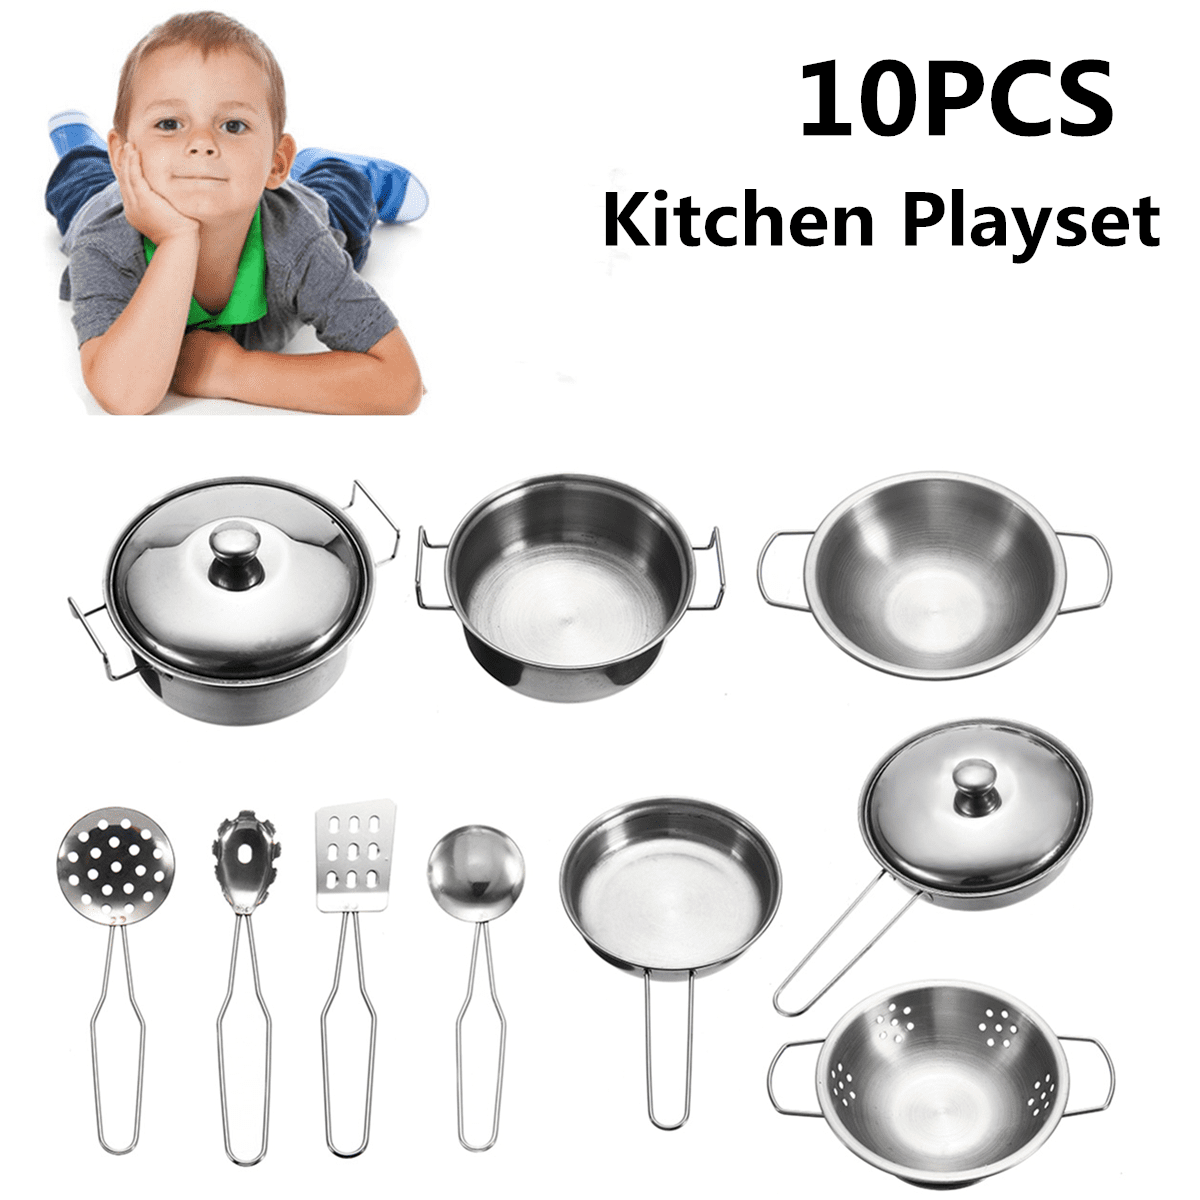 Stainless steel Cookware Kitchen Cooking Set Pot Pans House Play For Children 